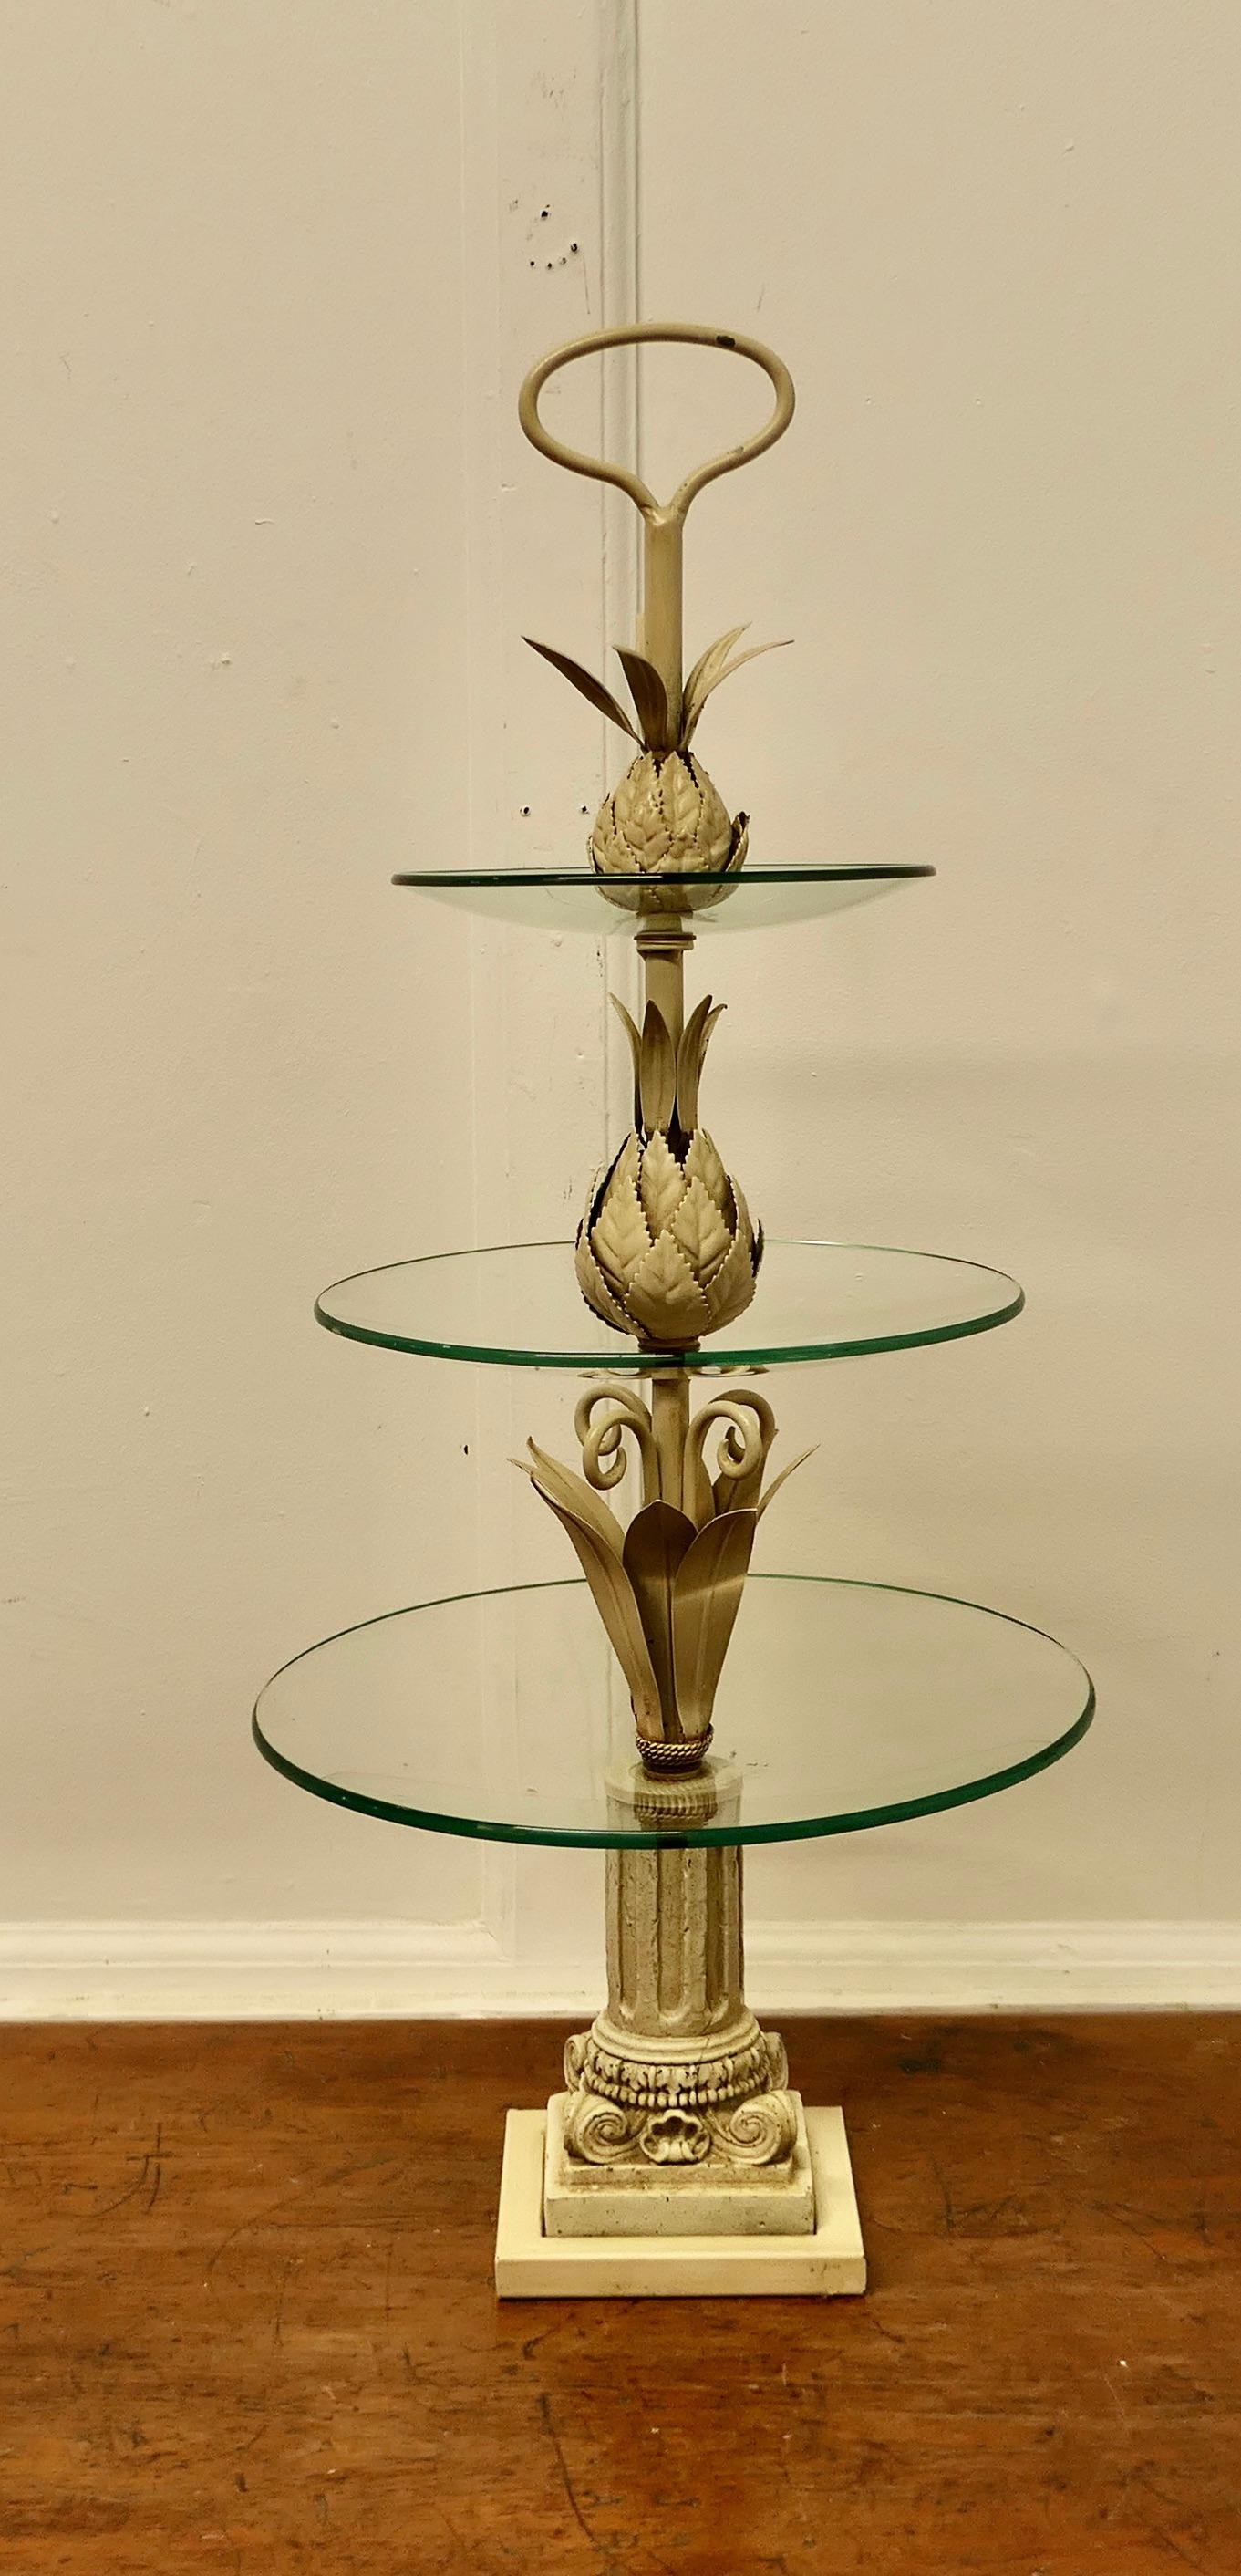 French Toleware Gueridon Cake Stand or Dumb Waiter 

A charming and unusual piece in good condition, it has a central column decorated with toleware pineapples, supporting 3 Glass plates  
The stand is in good condition, it is 34” tall and 14” in